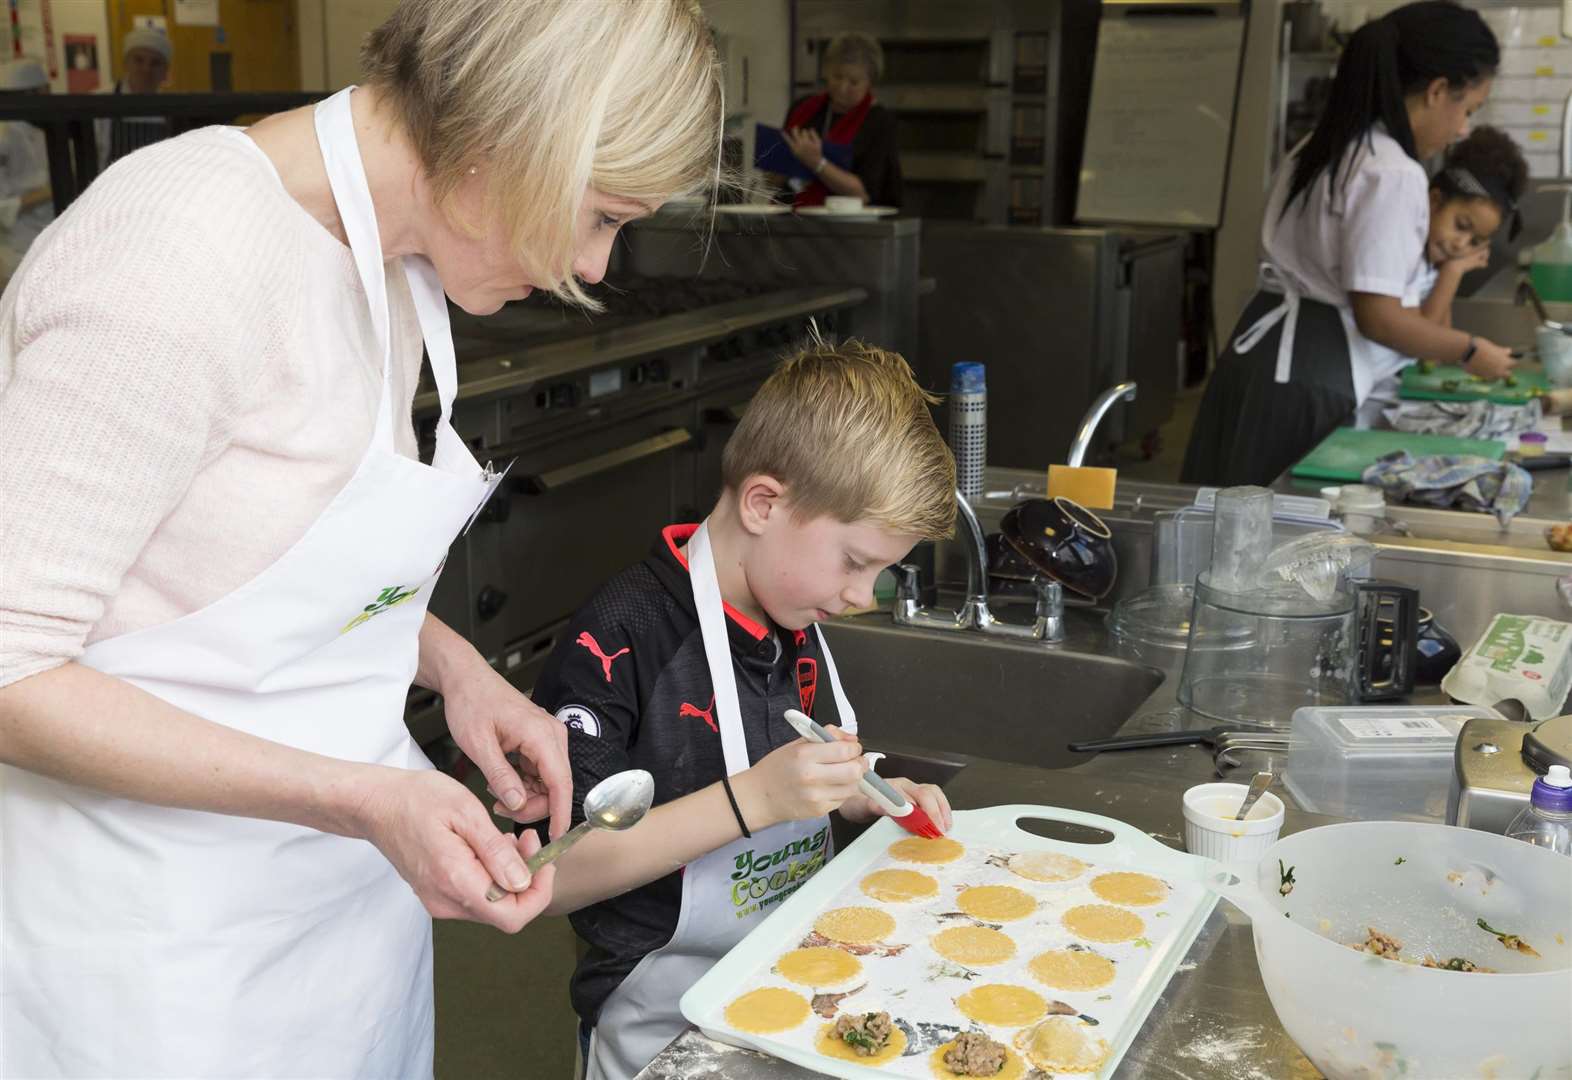 The Young Cooks deadline is November 7